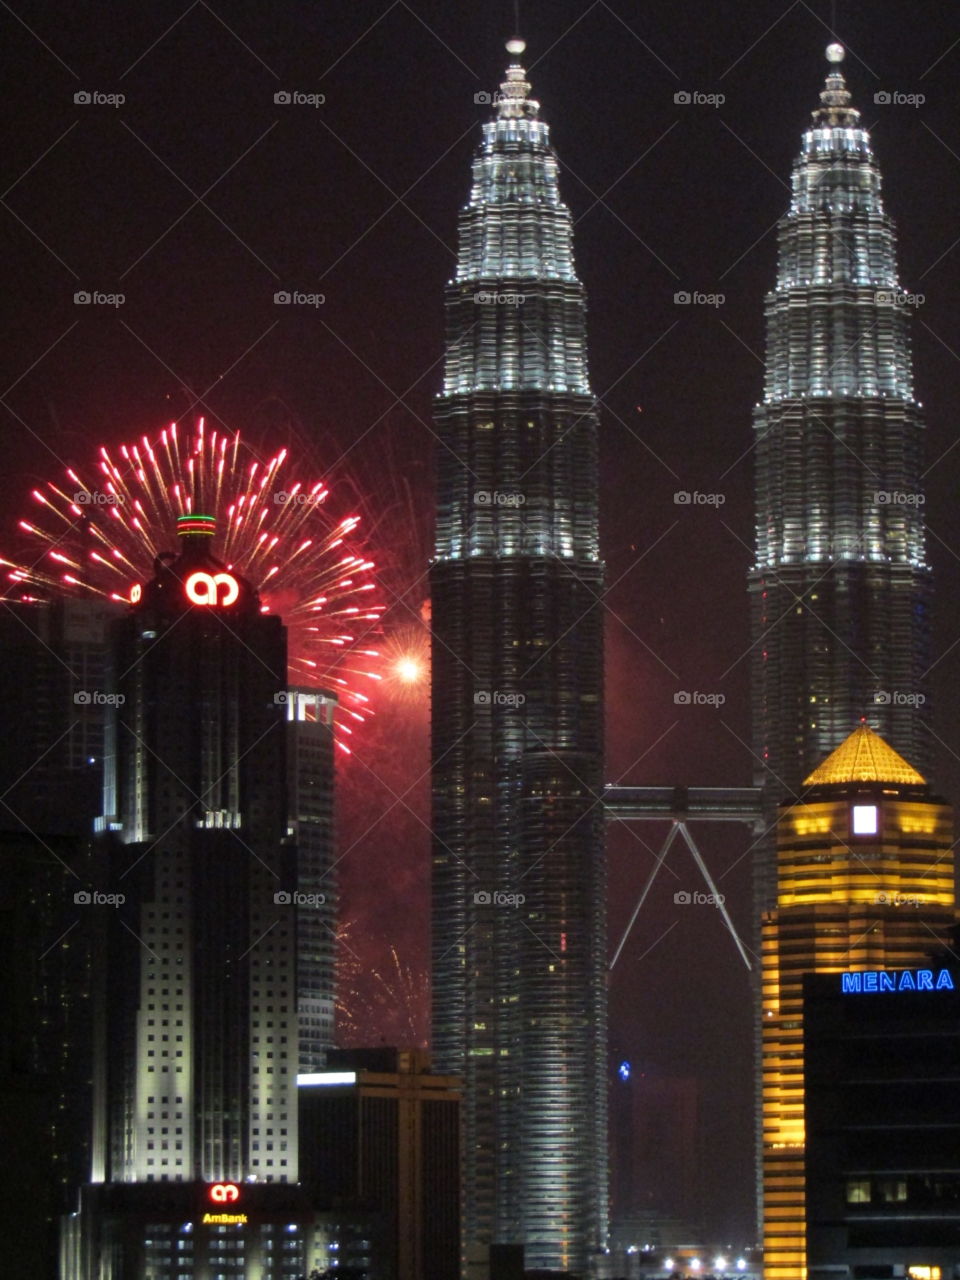 New year's fireworks at KLCC Malaysia